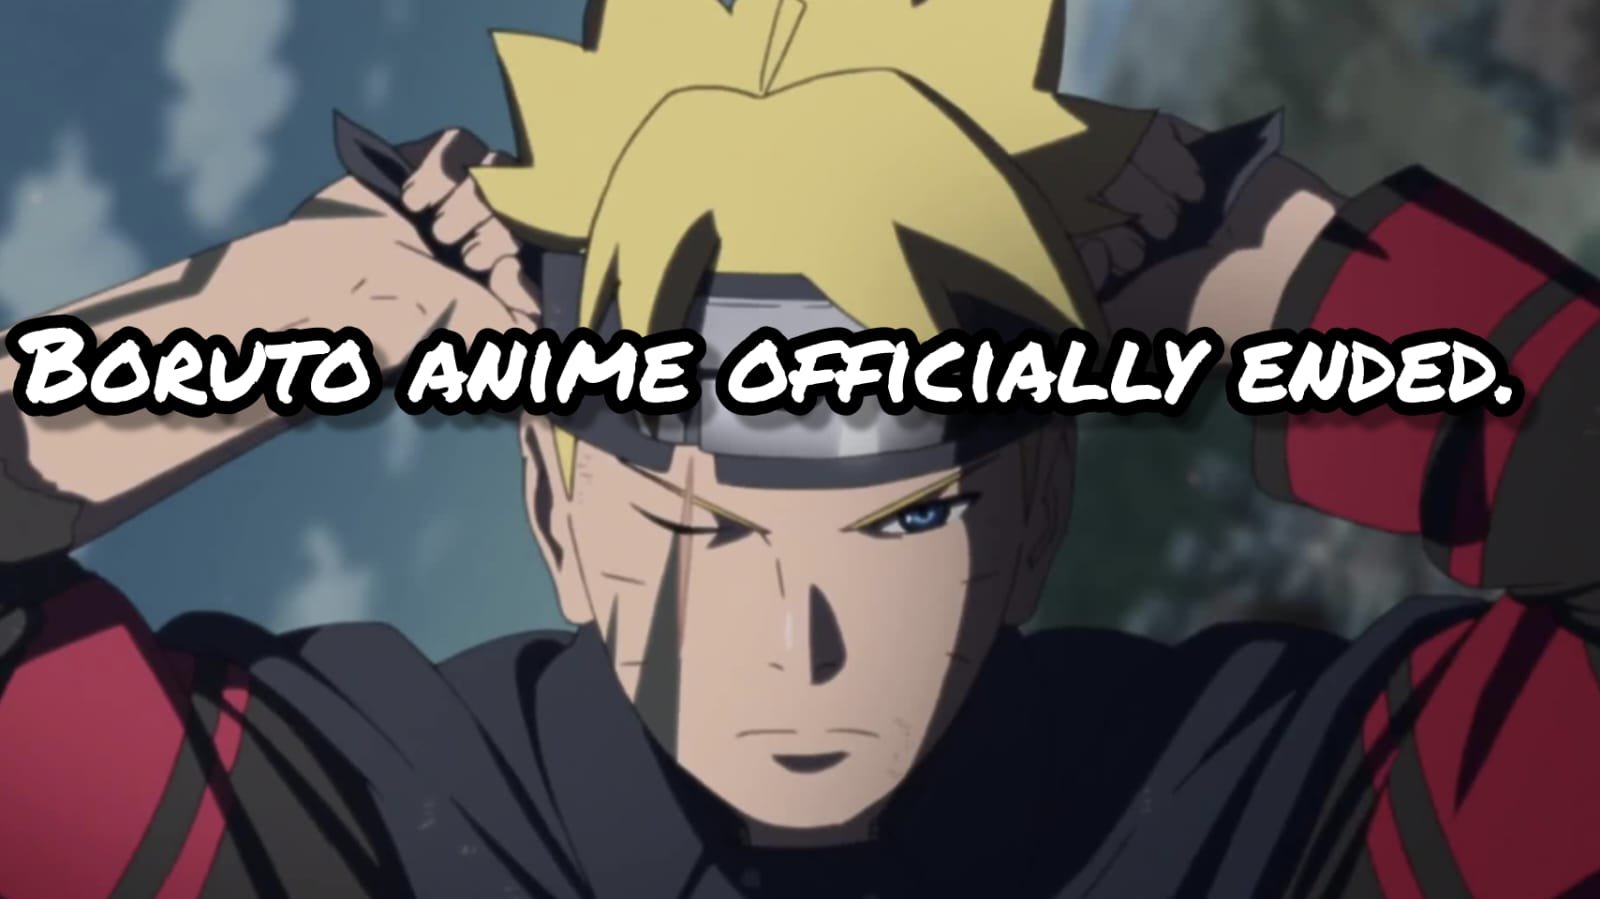 After Six years Boruto Naruto Next Generations finally ended.